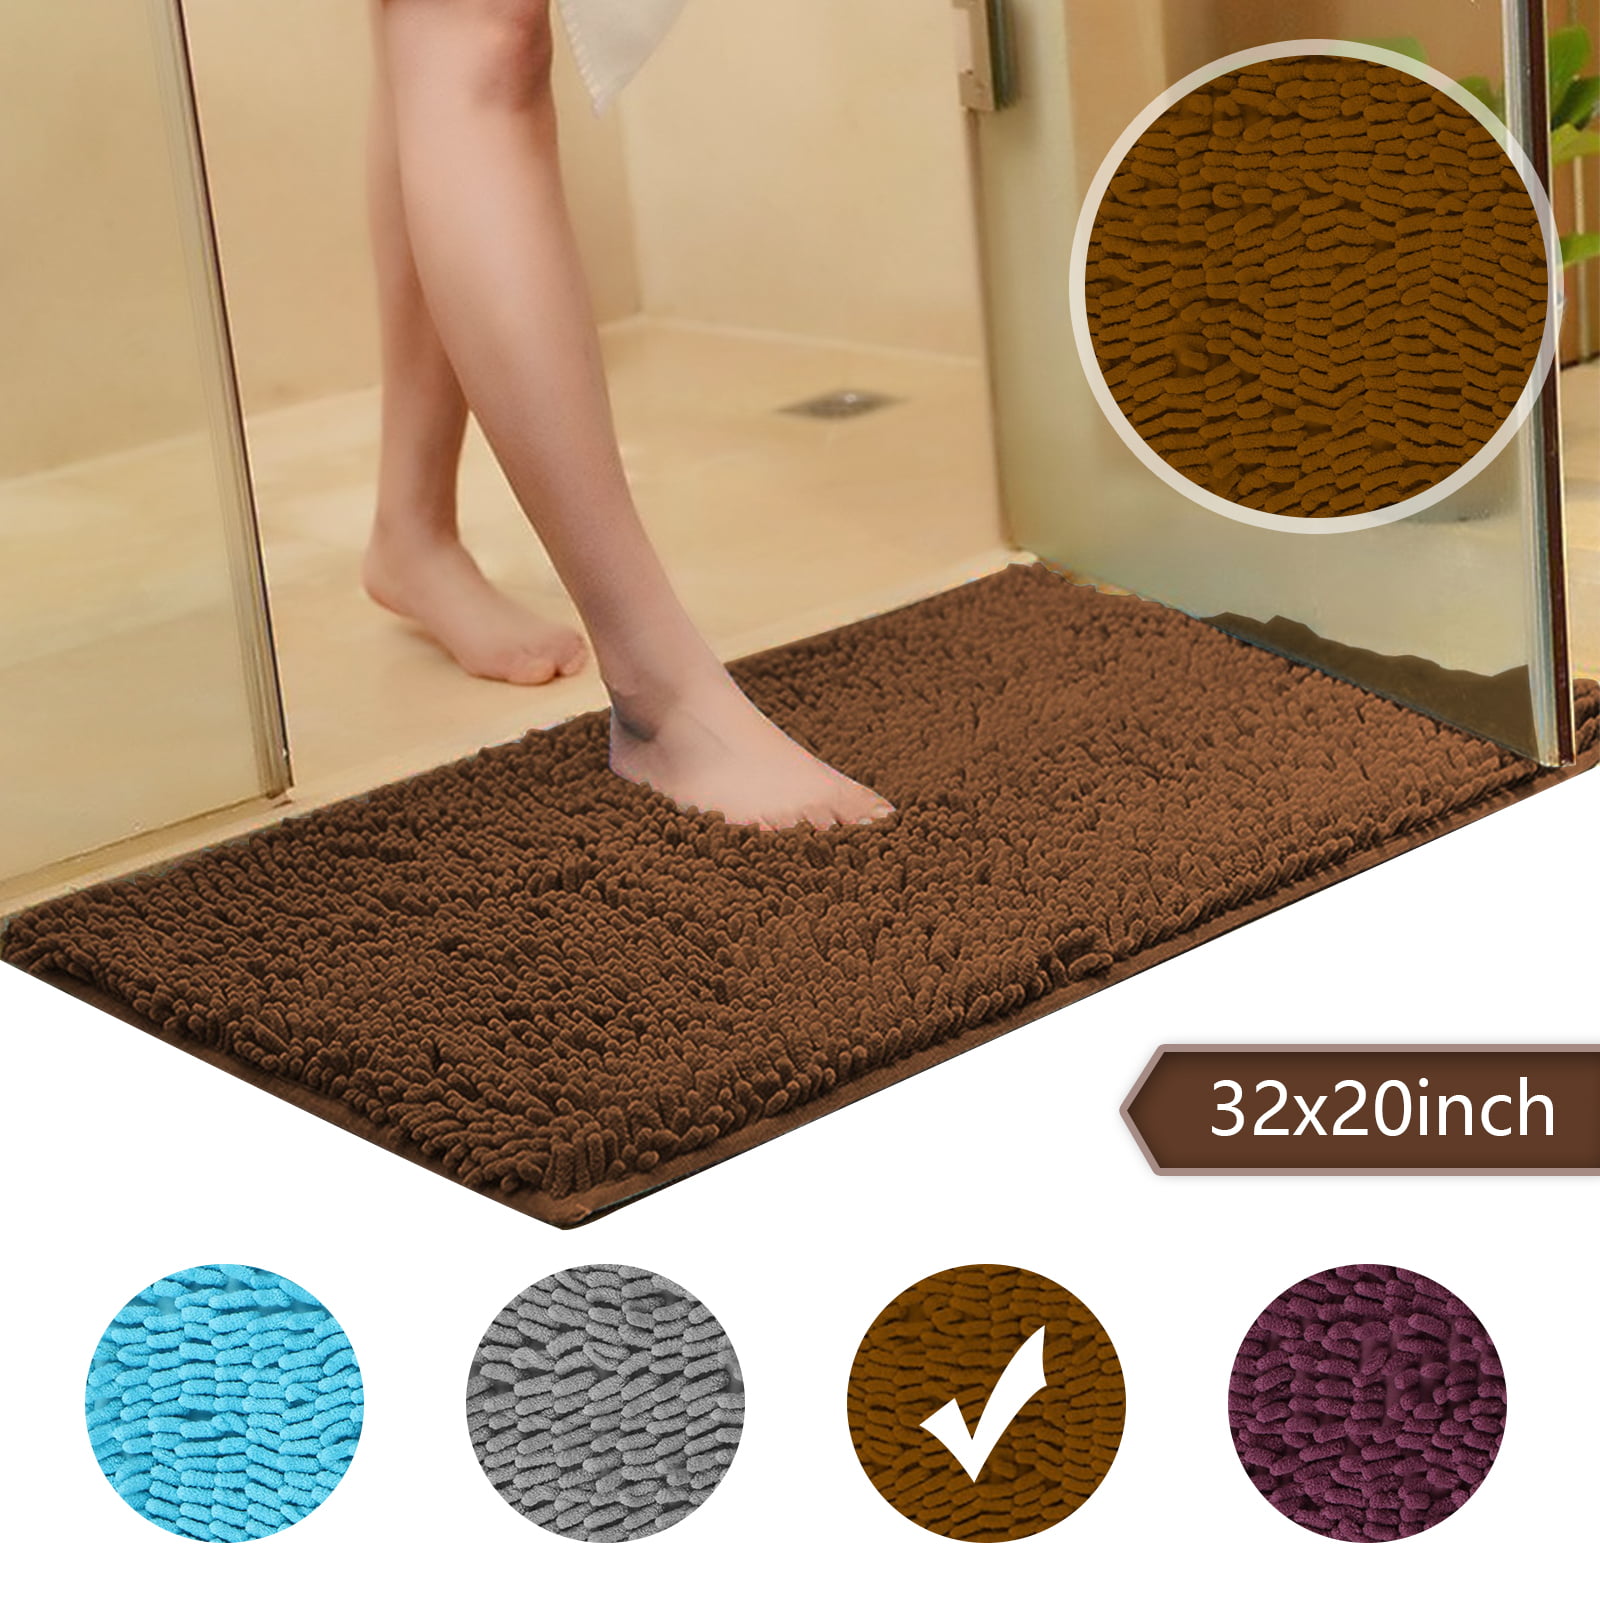 Quality Shiny Sparkling 2Pc Bath Mat Sets Non Slip Water Absorbent Bathroom Rugs 